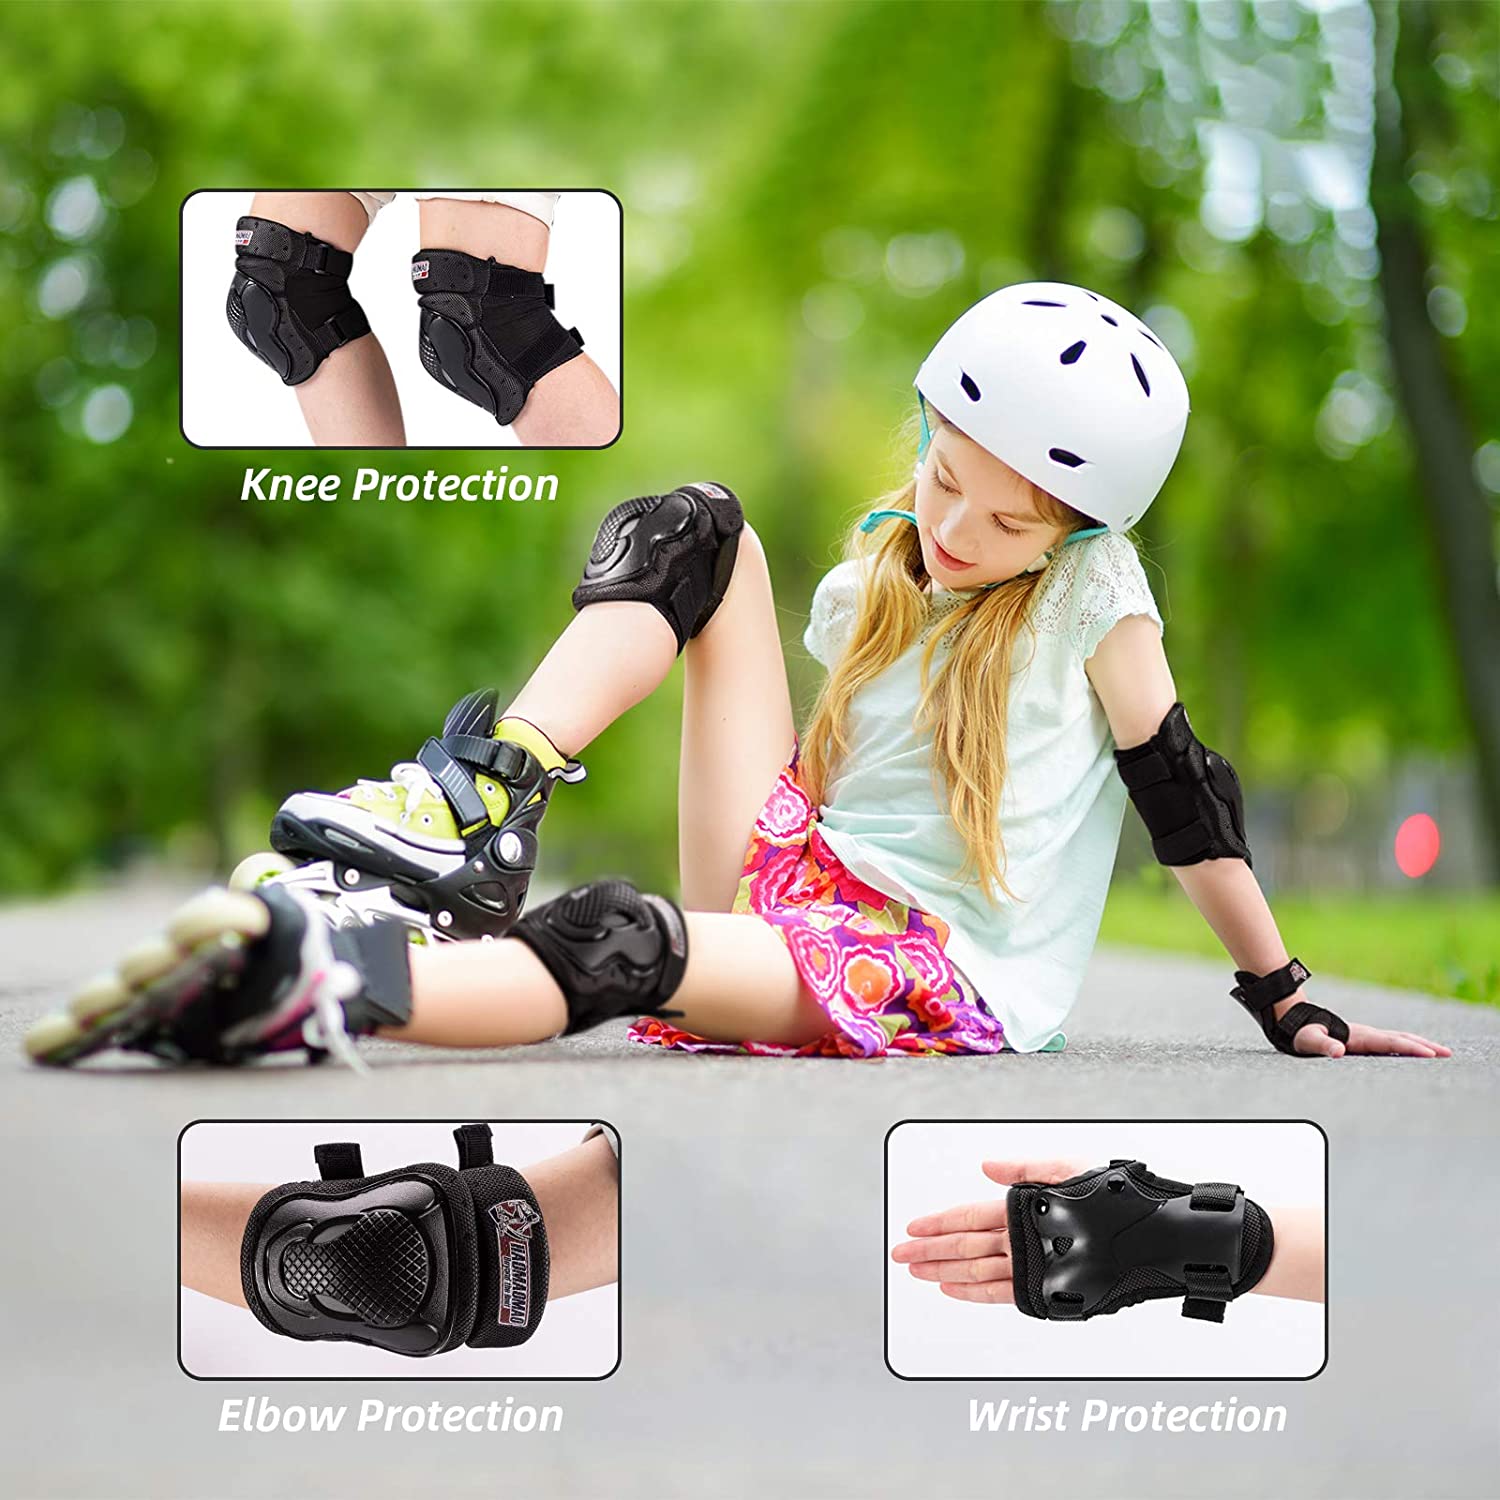 Haomaomao Kids/Youth Knee Pad Elbow Pads Wrist Guards Protective Gear Set,for Roller Skates Skating Skatings Cycling BMX Bike Skateboard Inline Scooter Riding Aldult Limit Sports Protective Device - image 5 of 7